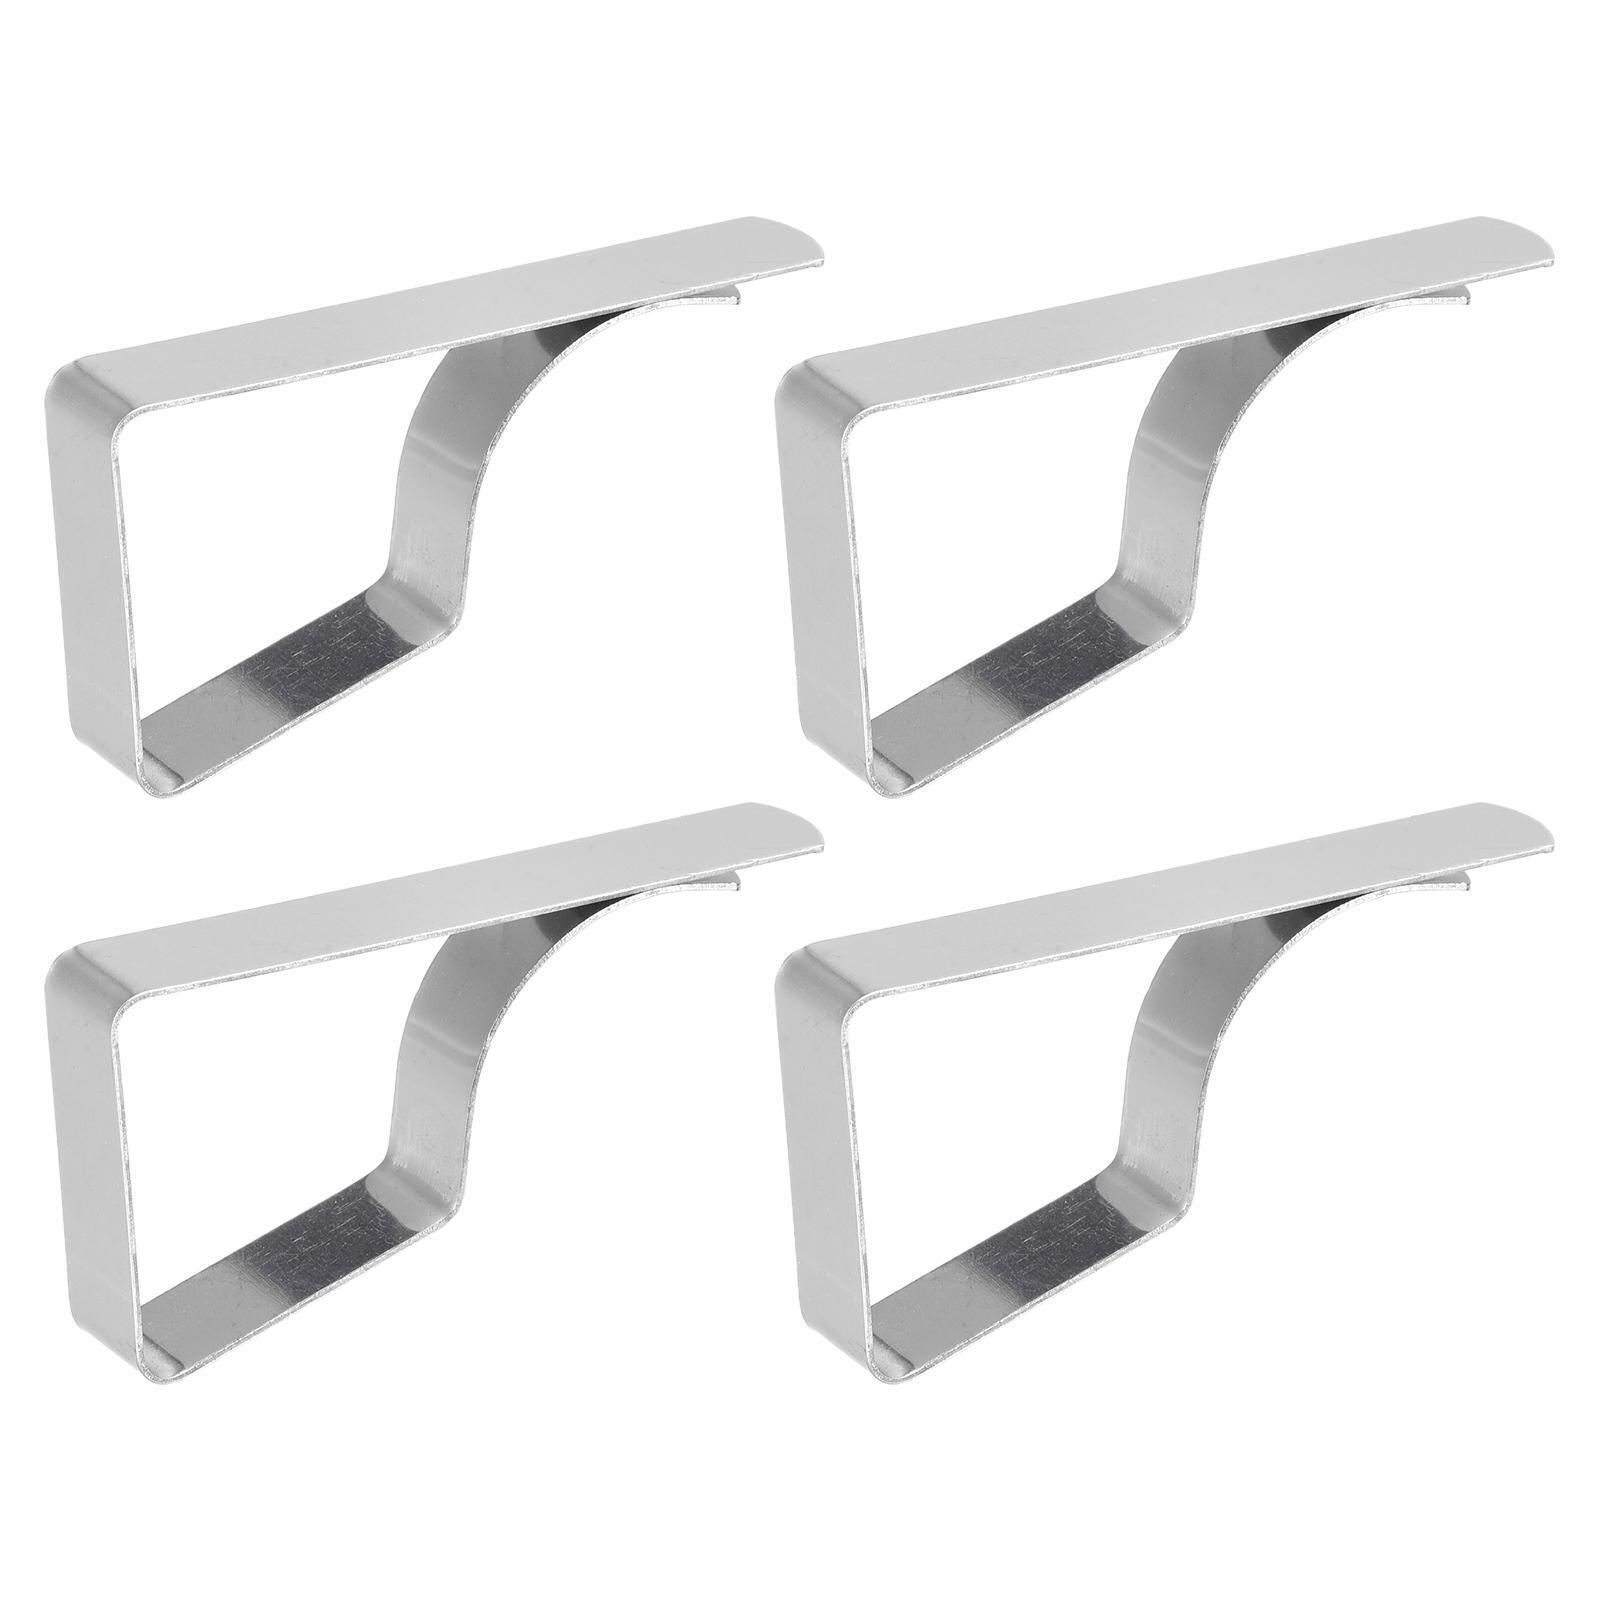 Tablecloth Clips 61mm X 31mm 430 Stainless Steel Table Cloth Holder Silver 4 Pcs